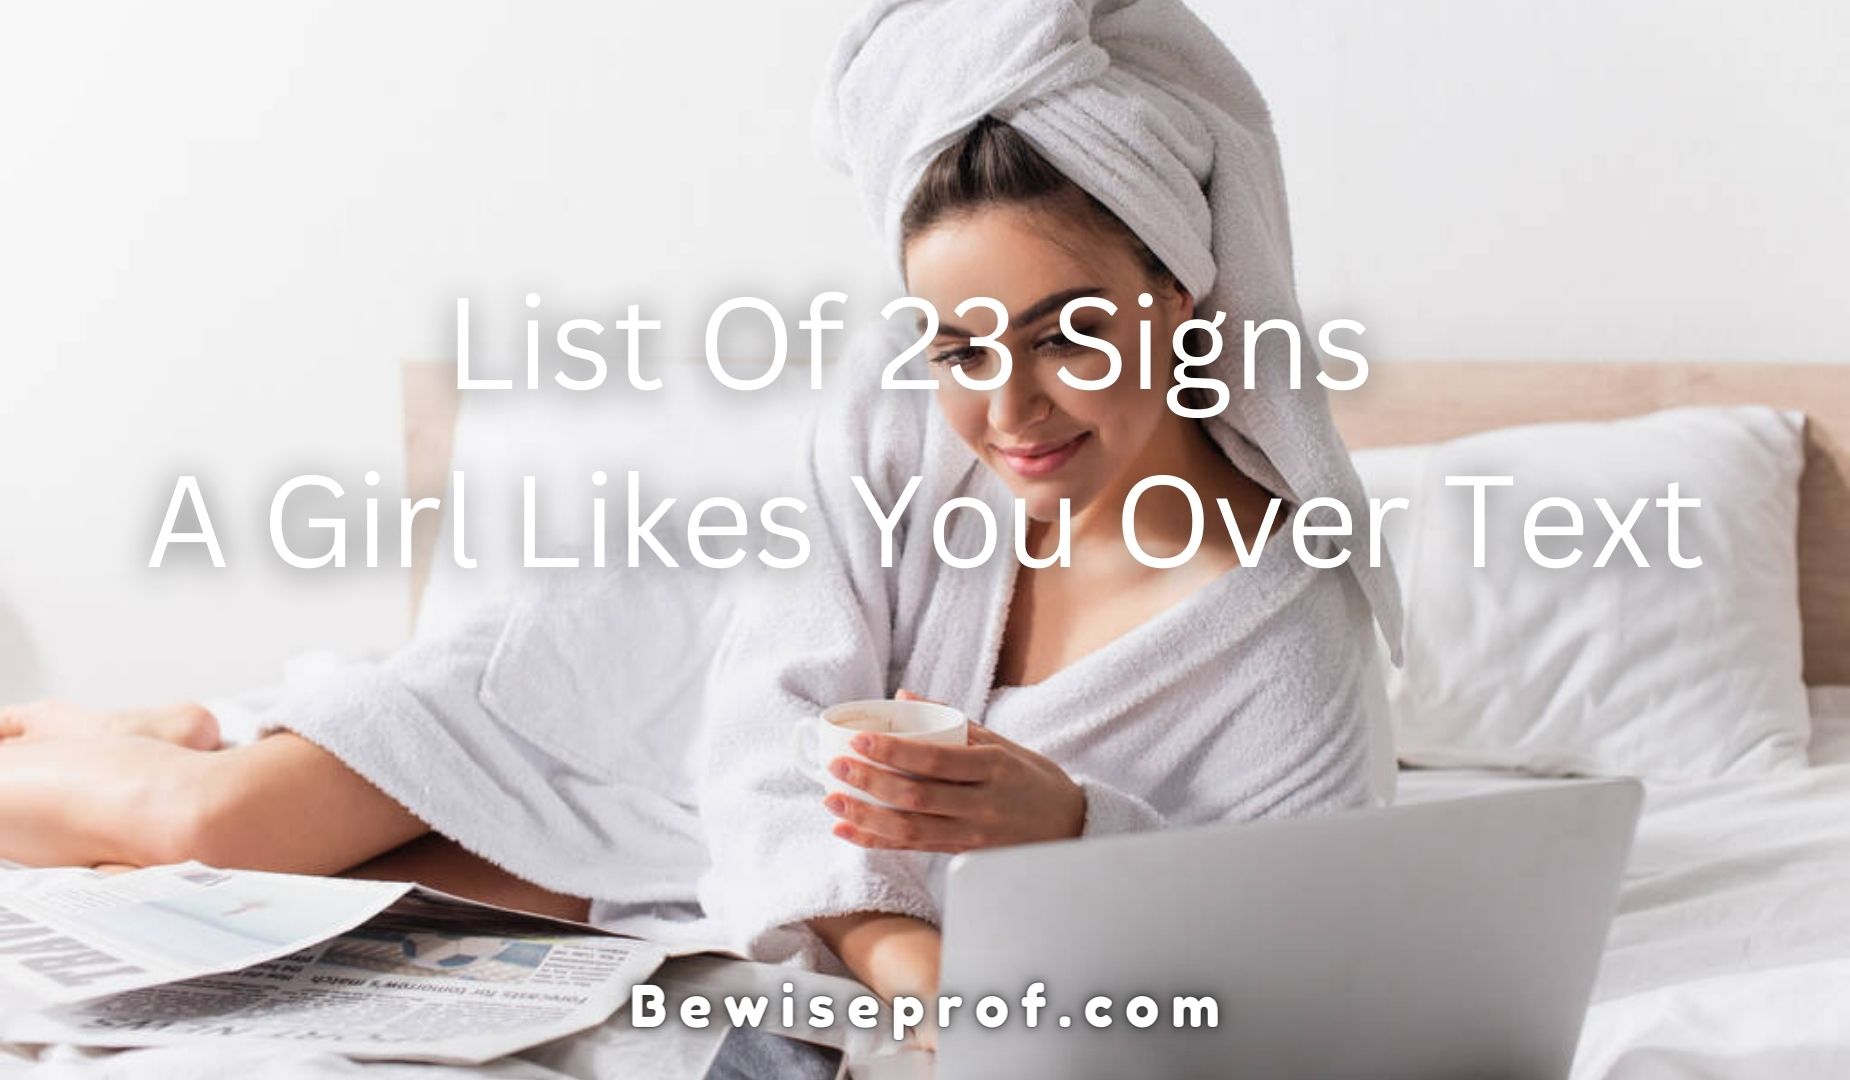 List Of 23 Signs A Girl Likes You Over Text